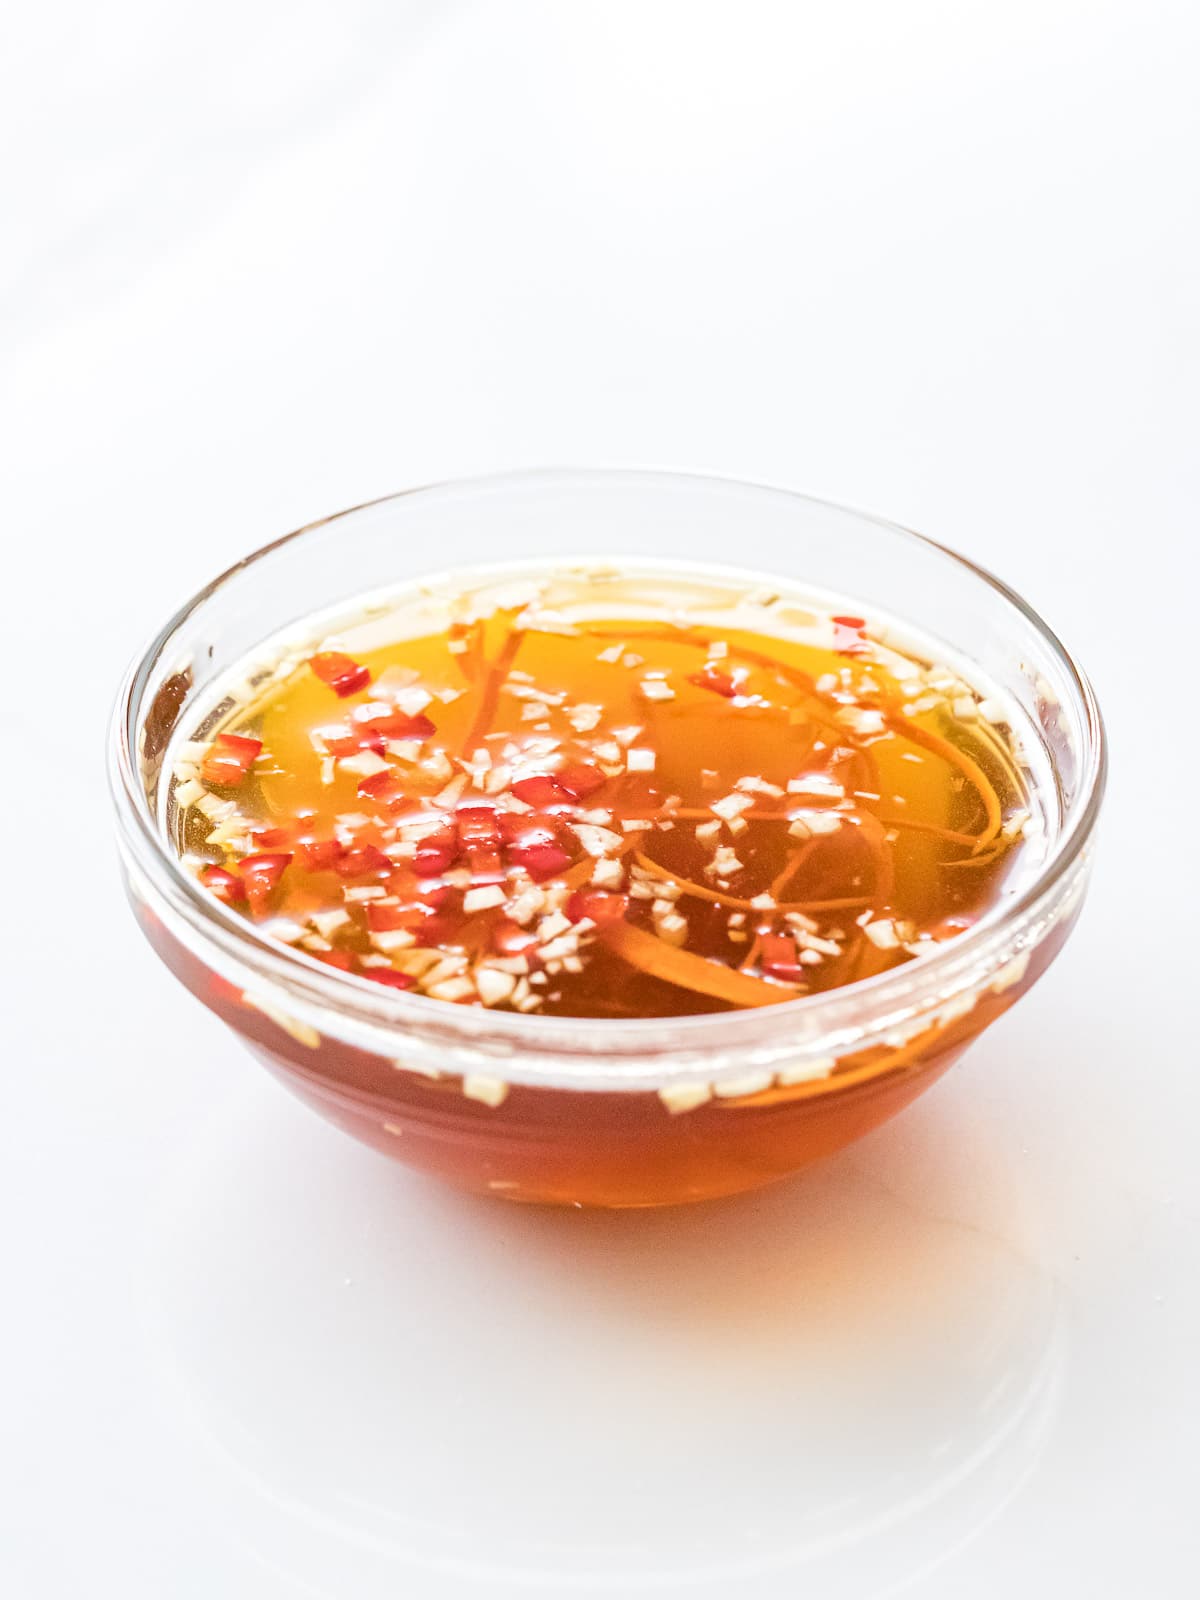 Vietnamese fish sauce dipping sauce with red chilis; nuoc cham